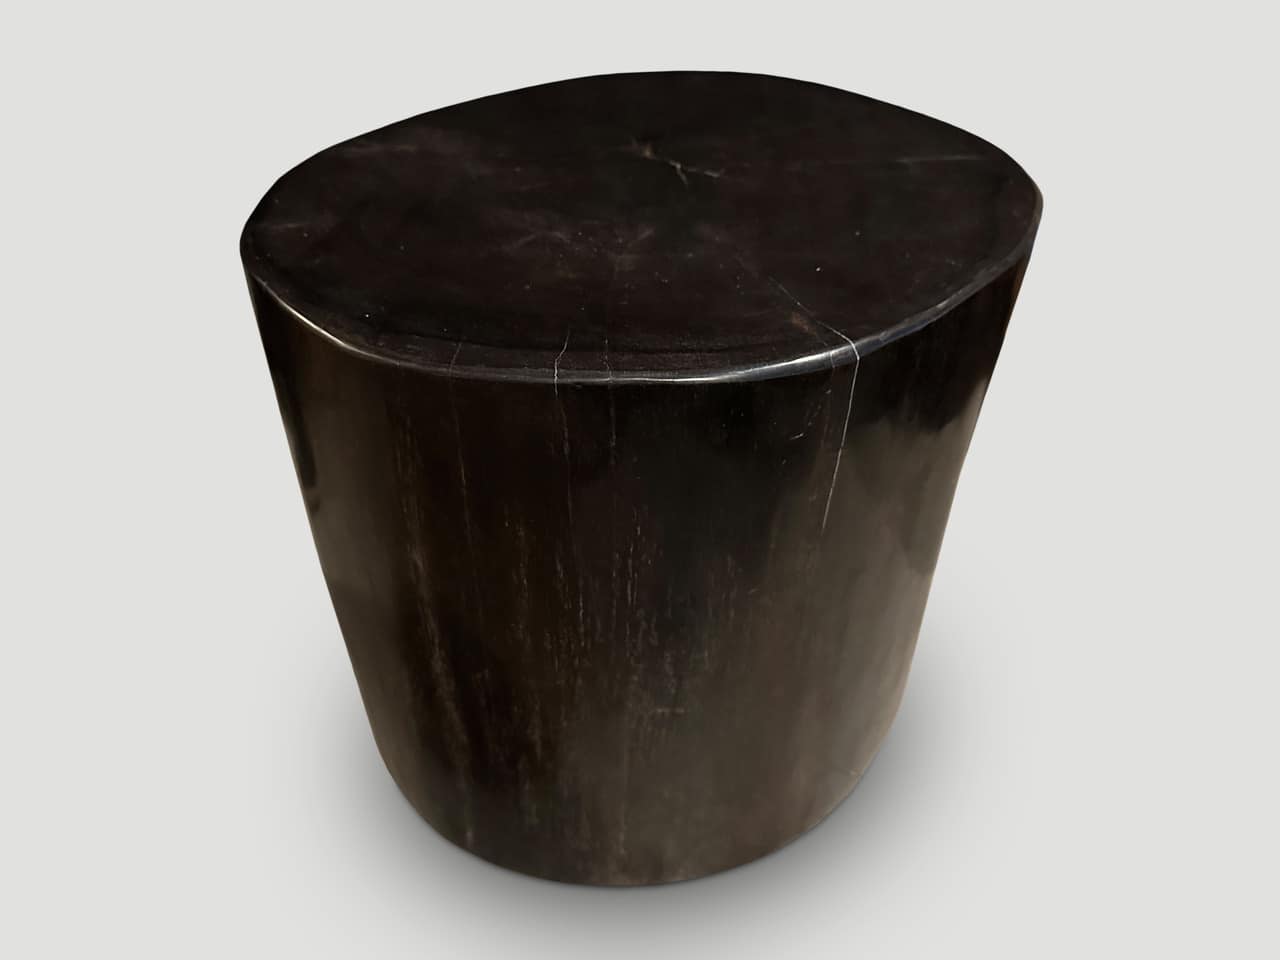 SUPER SMOOTH HIGH QUALITY PETRIFIED WOOD SIDE TABLE.